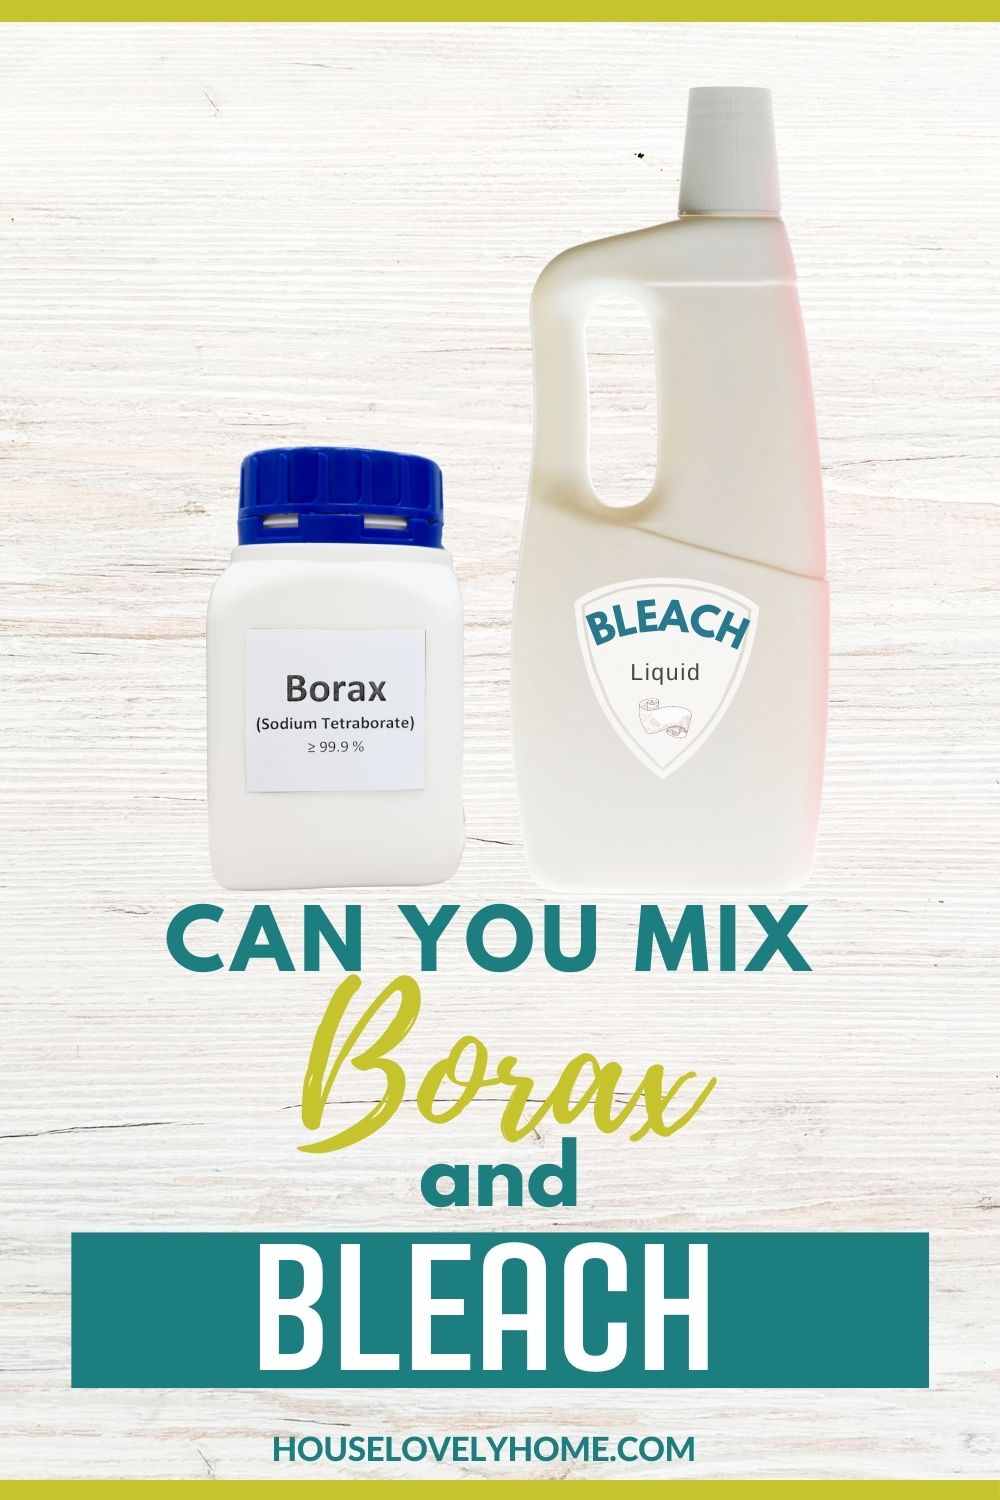 Image showing borax in white jar and bleach in white container with text overlay that reads Can you mix borax and bleach